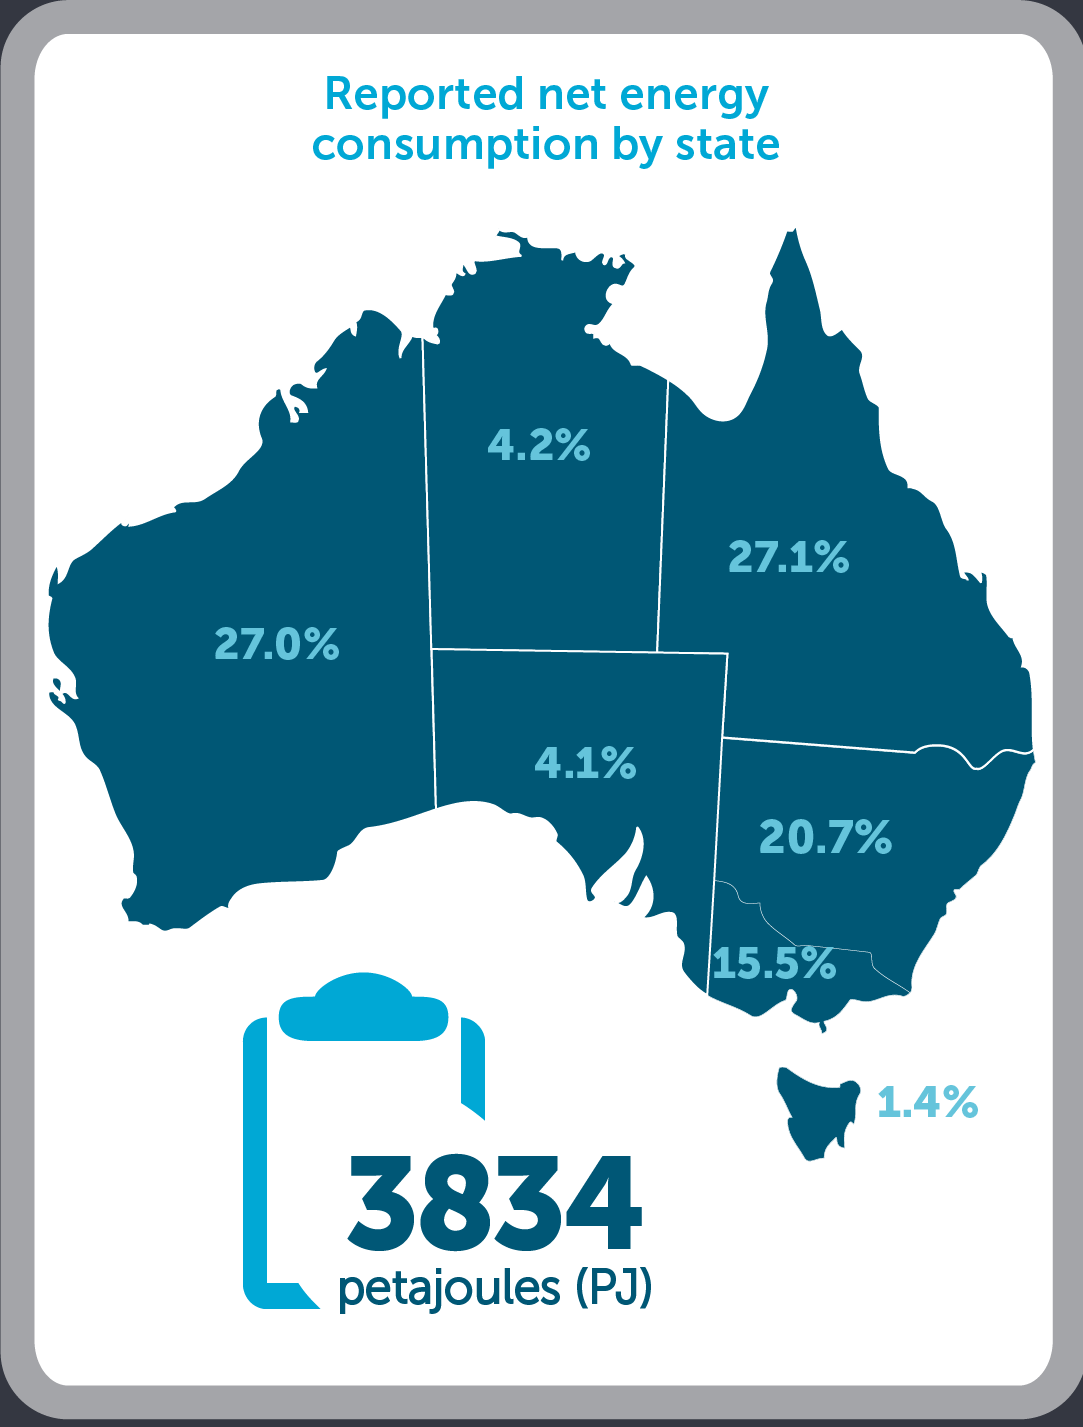 Map of Australia showing percentages of reported net energy consumption by state